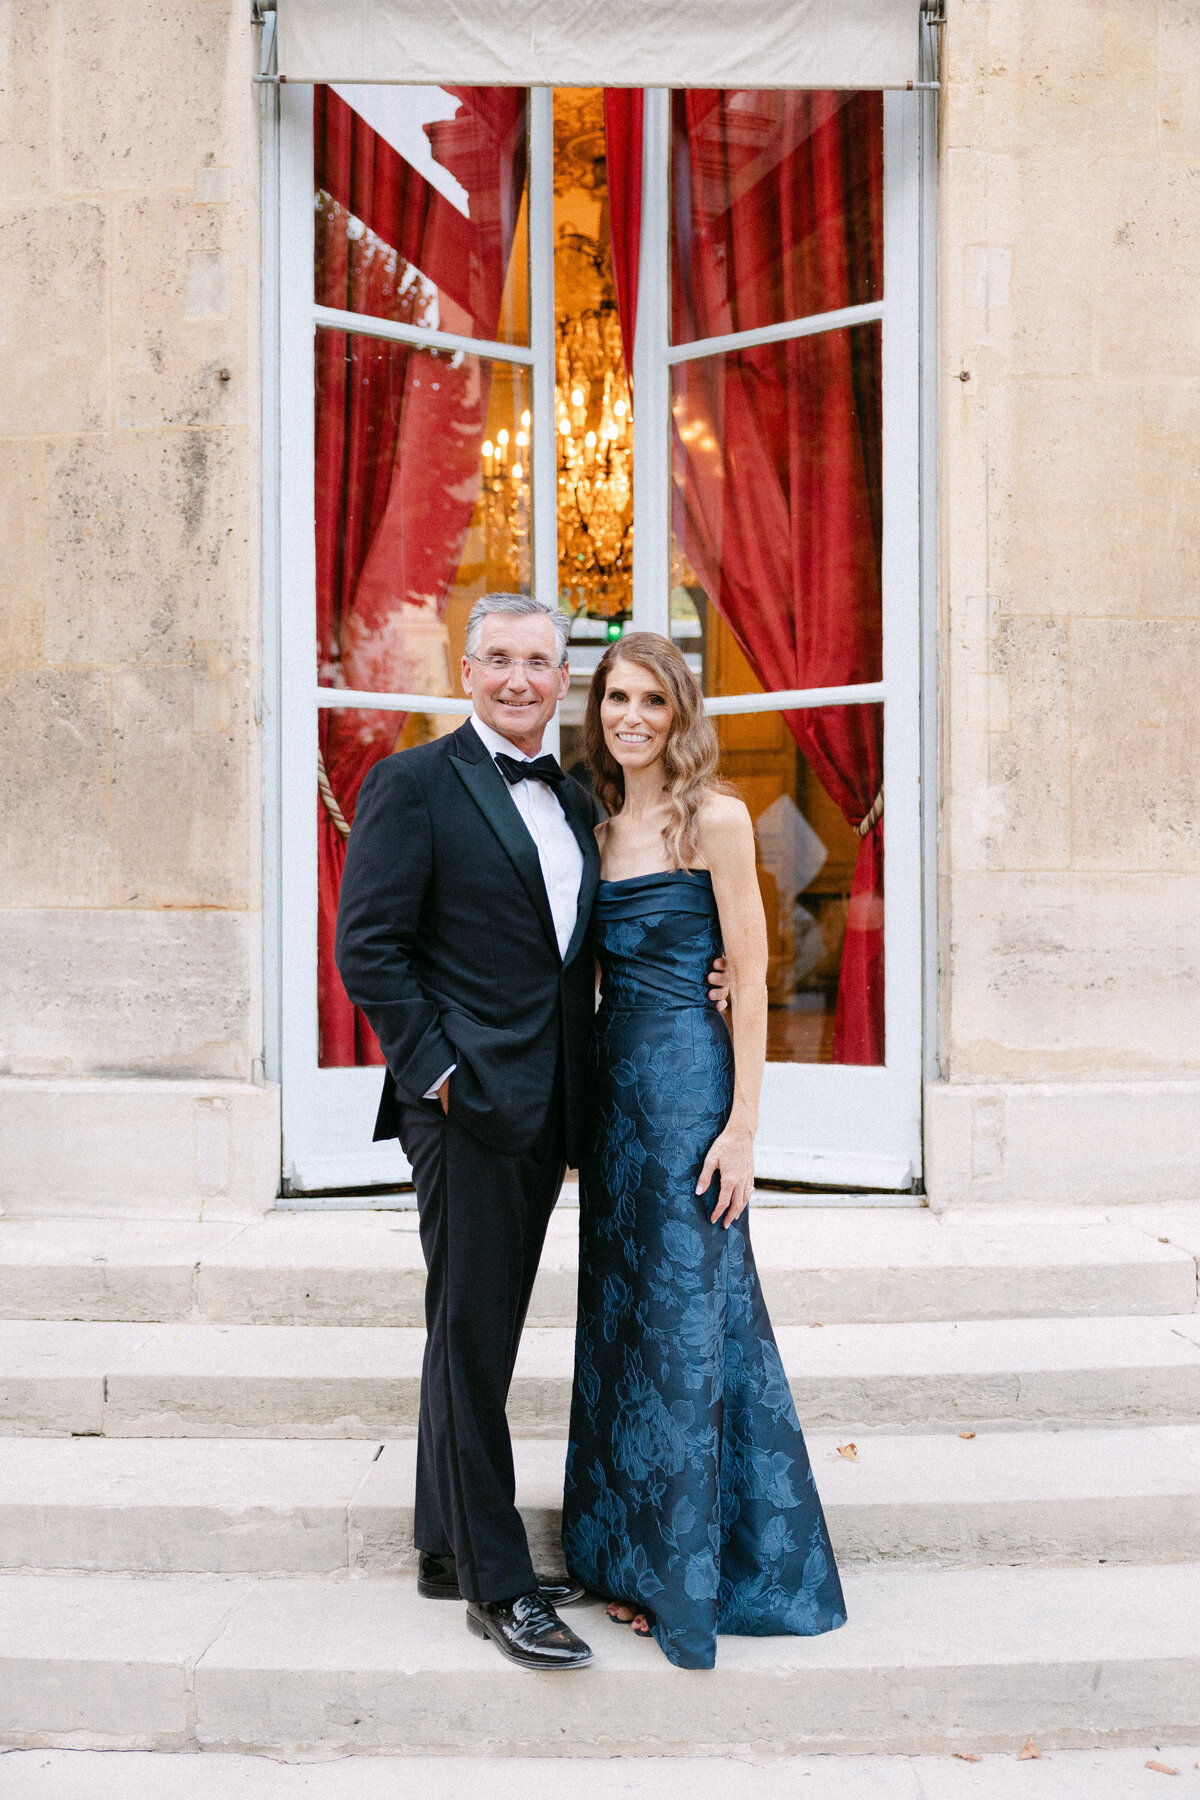 Jennifer Fox Weddings English speaking wedding planning & design agency in France crafting refined and bespoke weddings and celebrations Provence, Paris and destination wd747